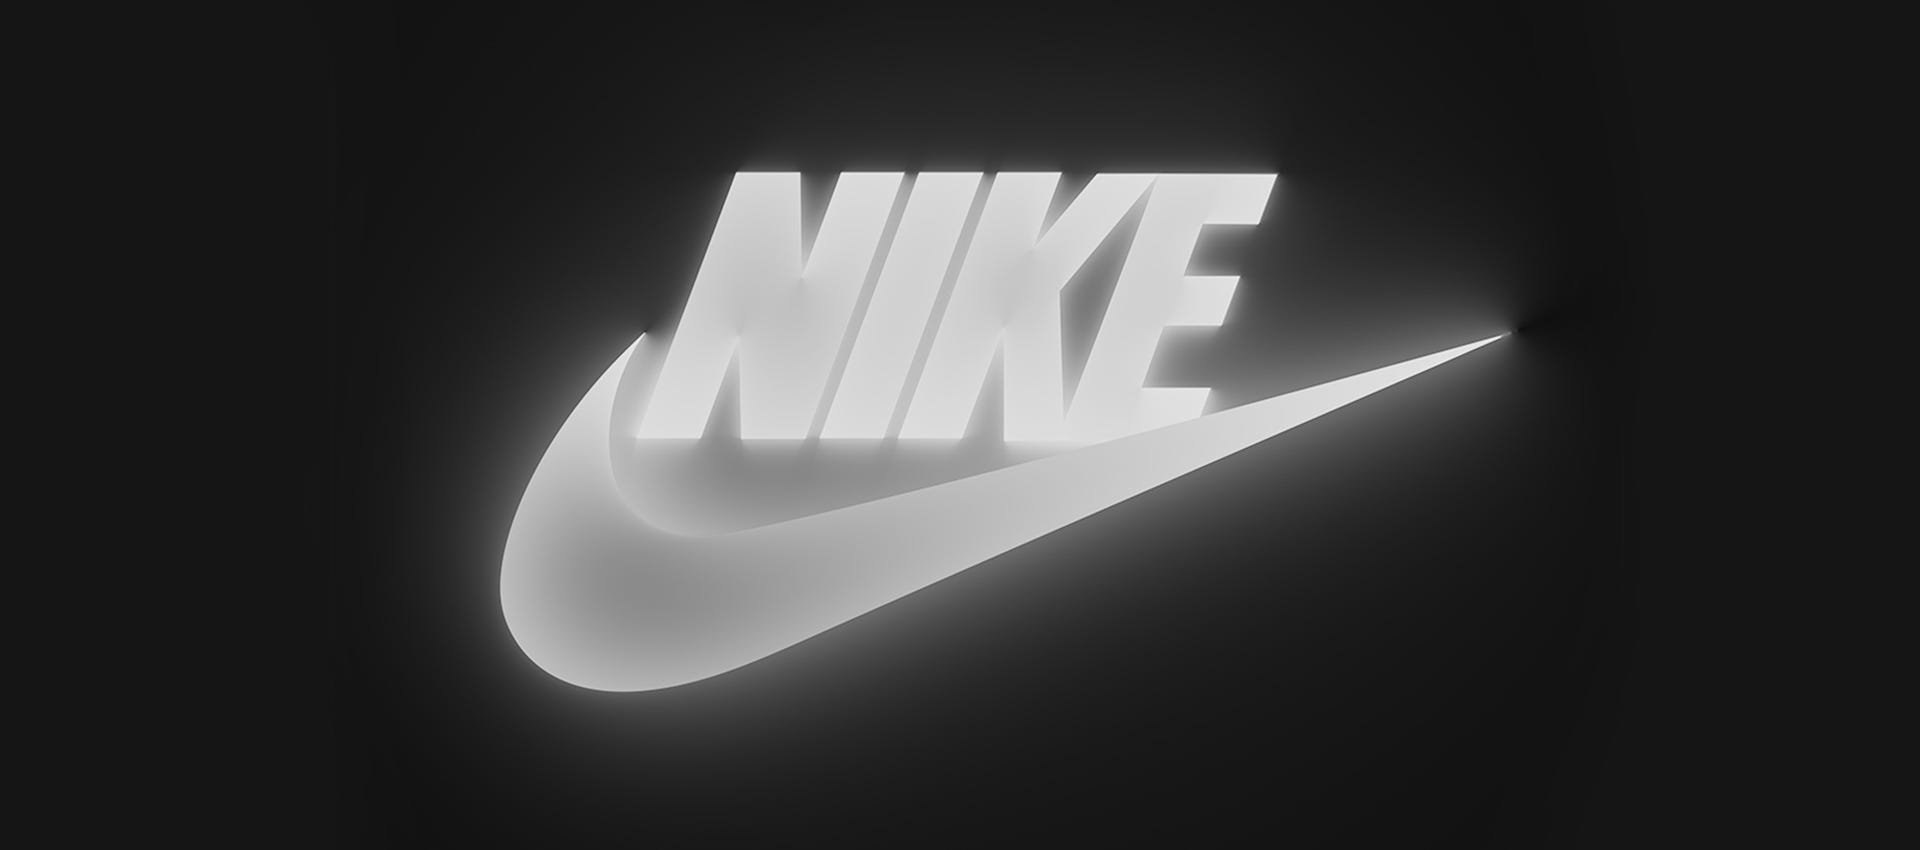 about nike brand